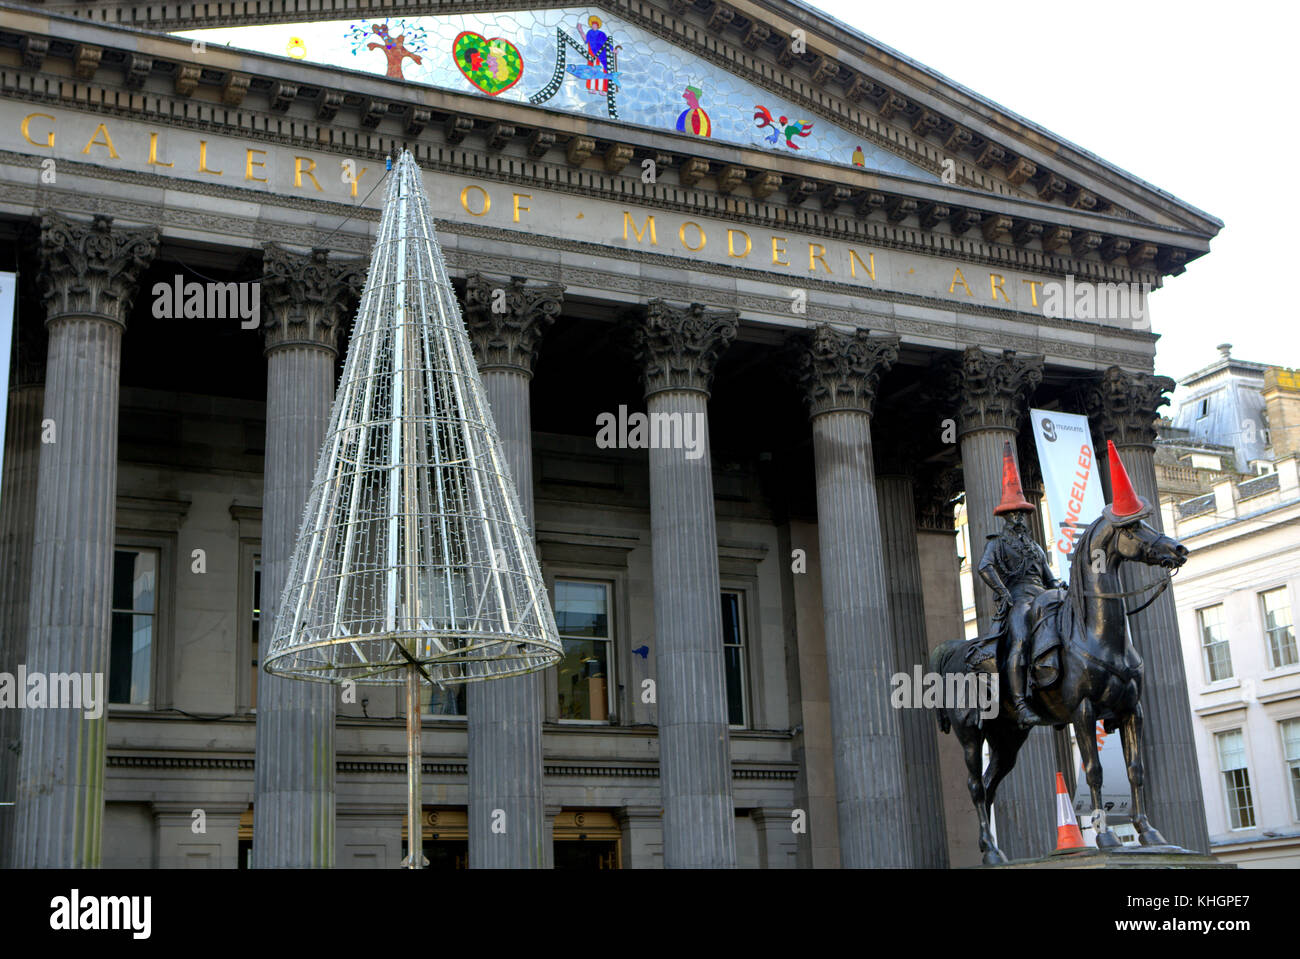 Glasgow, Scotland, UK 17th Nov, 2017. First full day of Princes square christmas lights open ahead of the city's george square celebrations that light up on sunday and the cone head man outside the goma or gallery of modern art lights up on the same night. Credit: gerard ferry/Alamy Live News Stock Photo